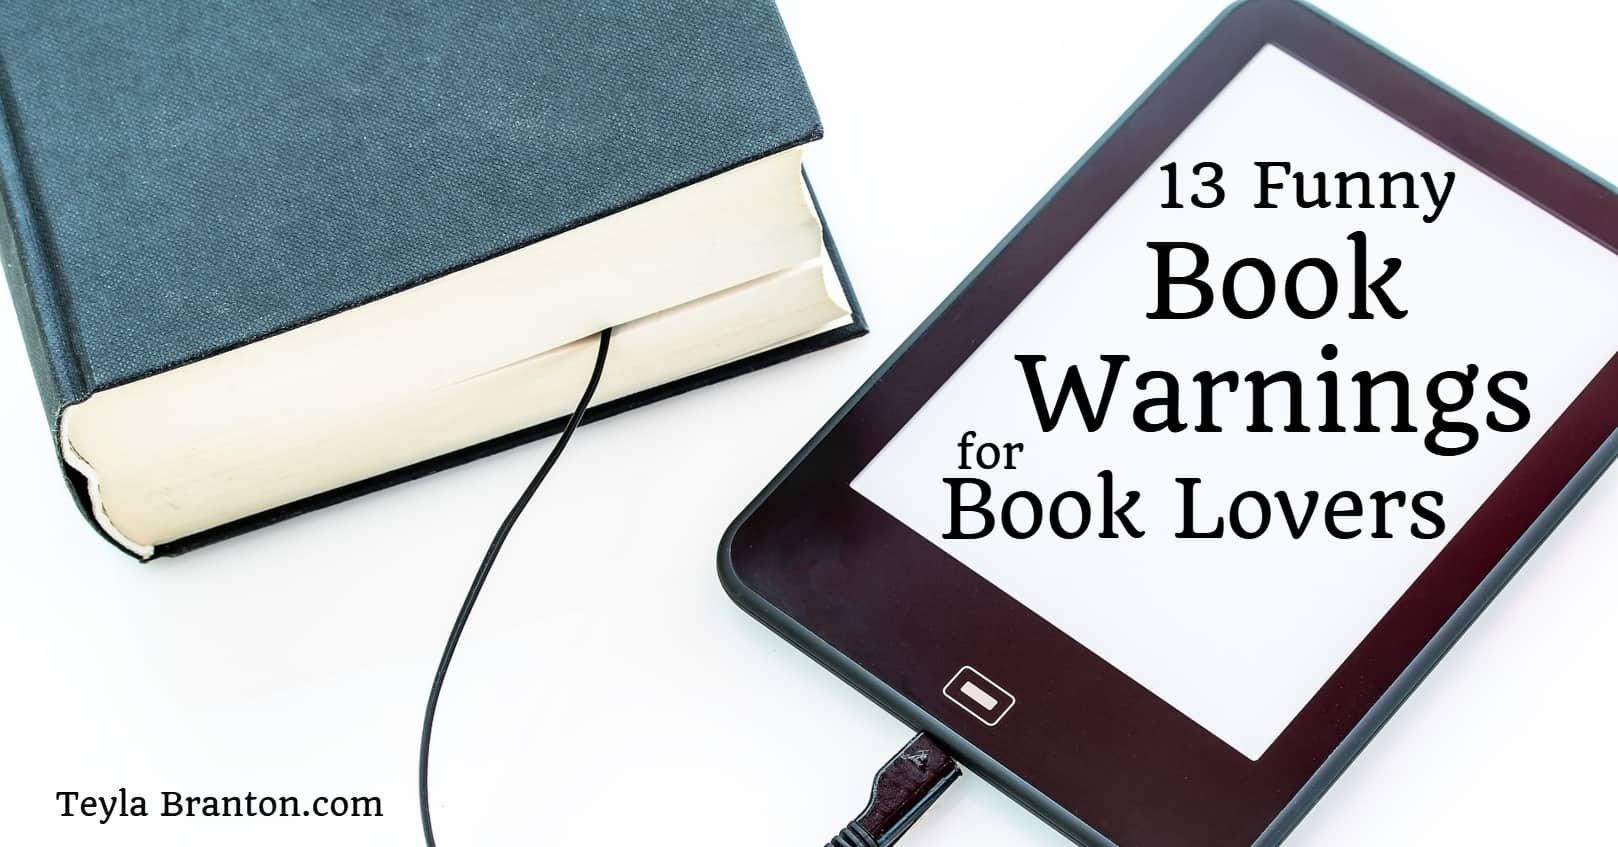 13 Funny Book Warnings for Book Lovers